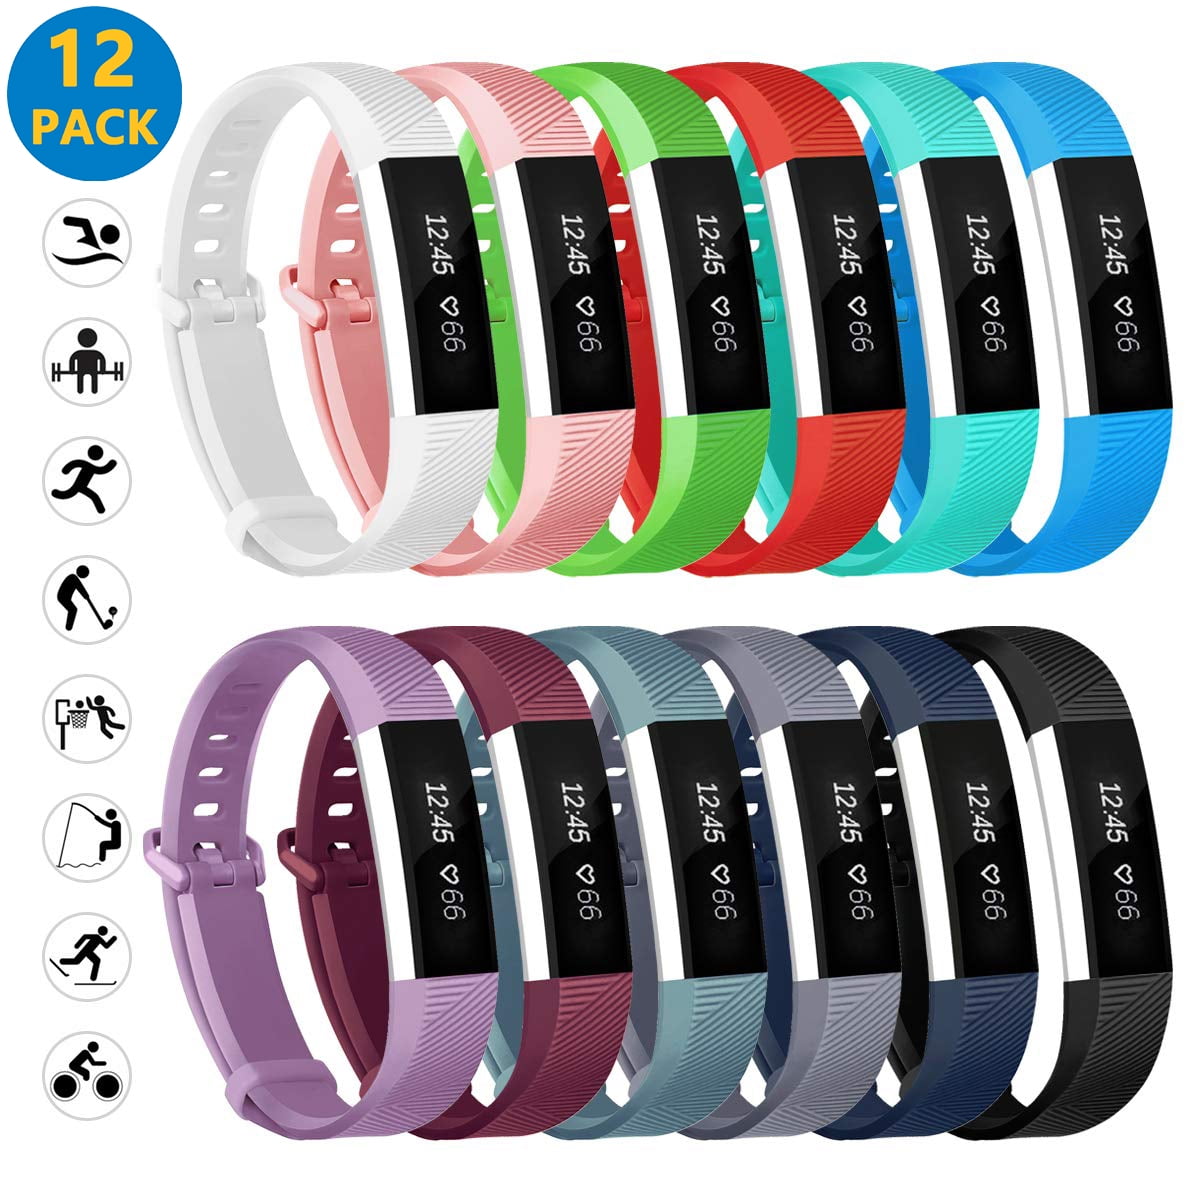 personalized fitbit bands